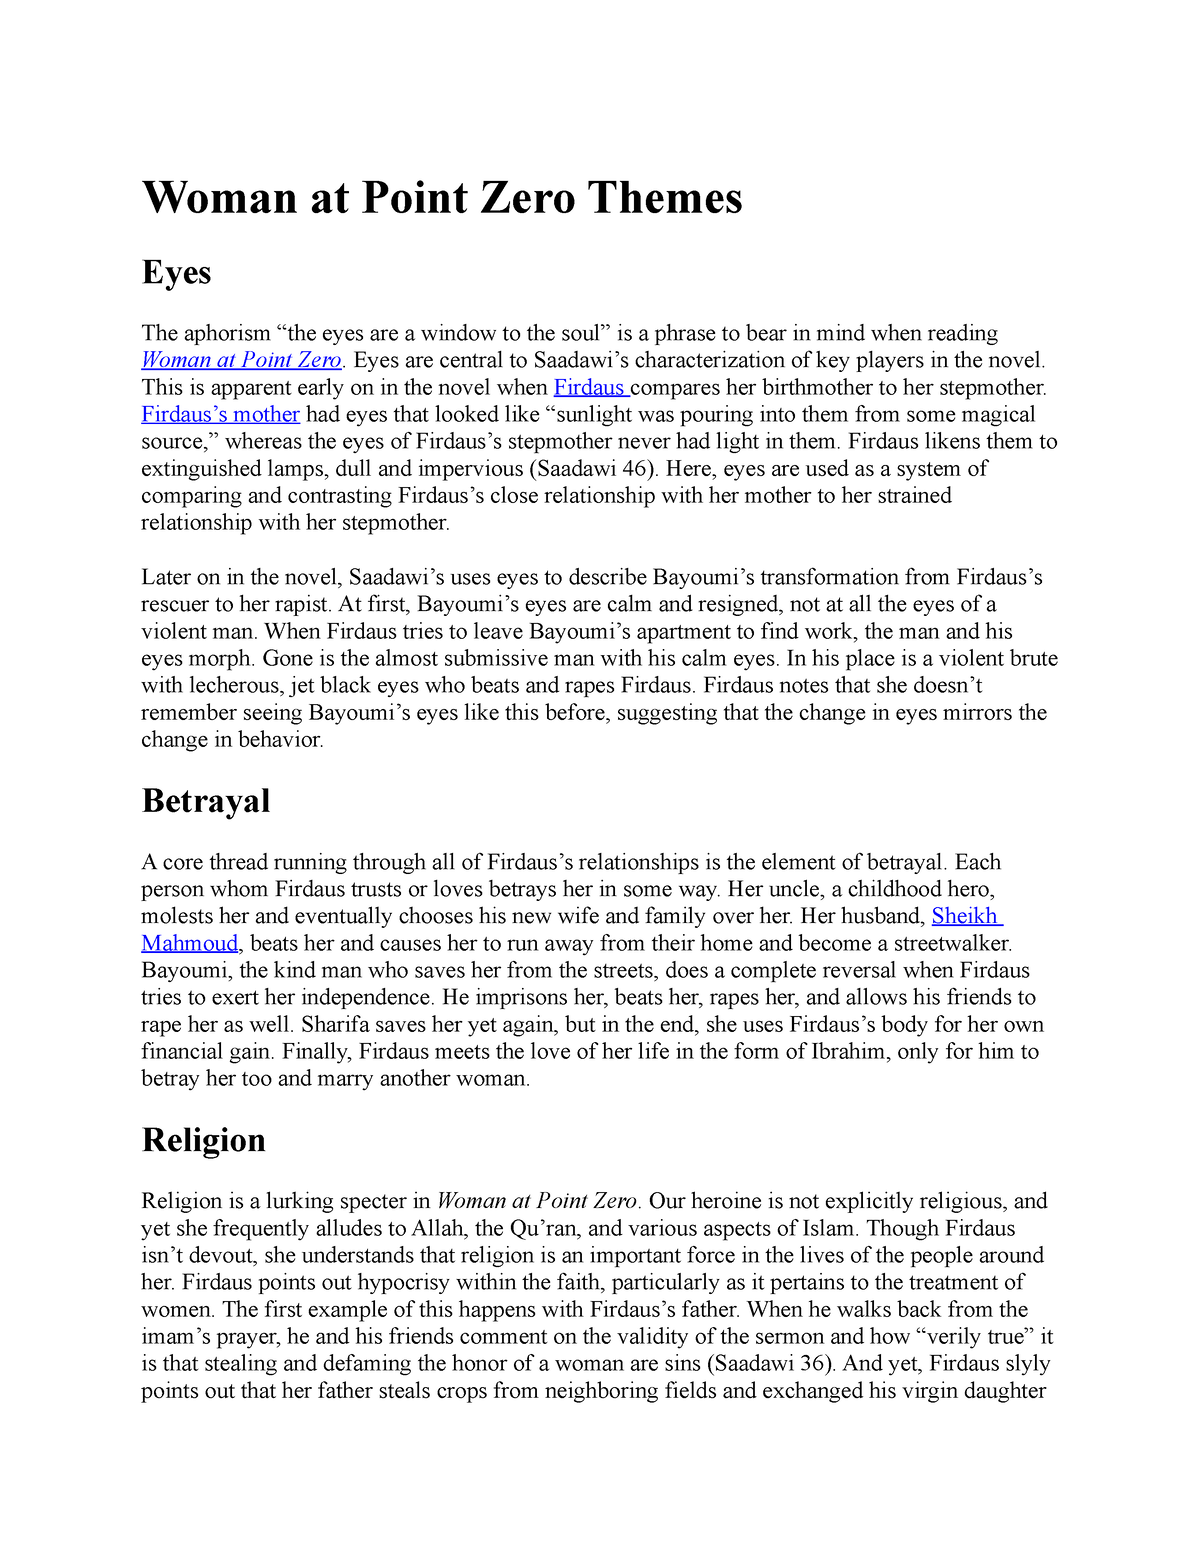 literature review on woman at point zero pdf